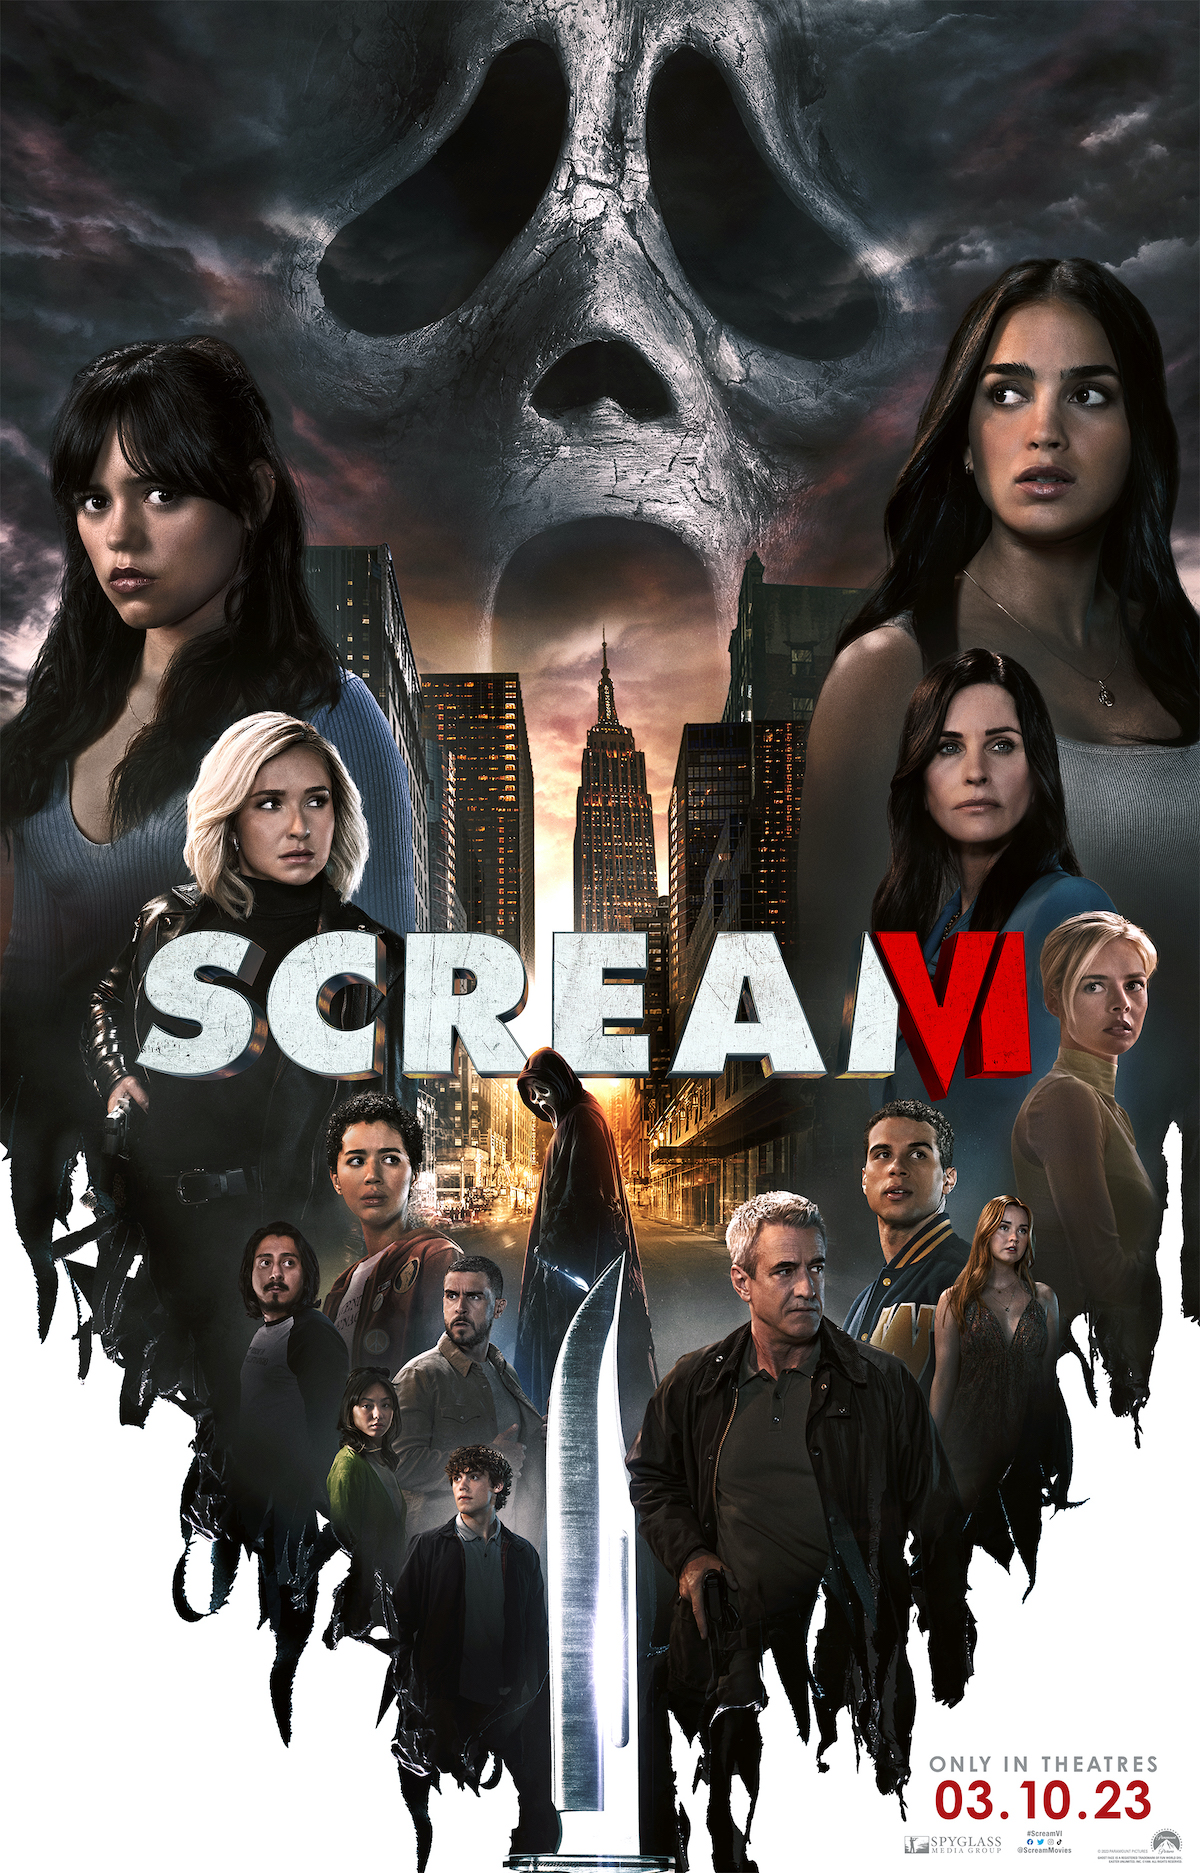 Scream VI poster and first look images